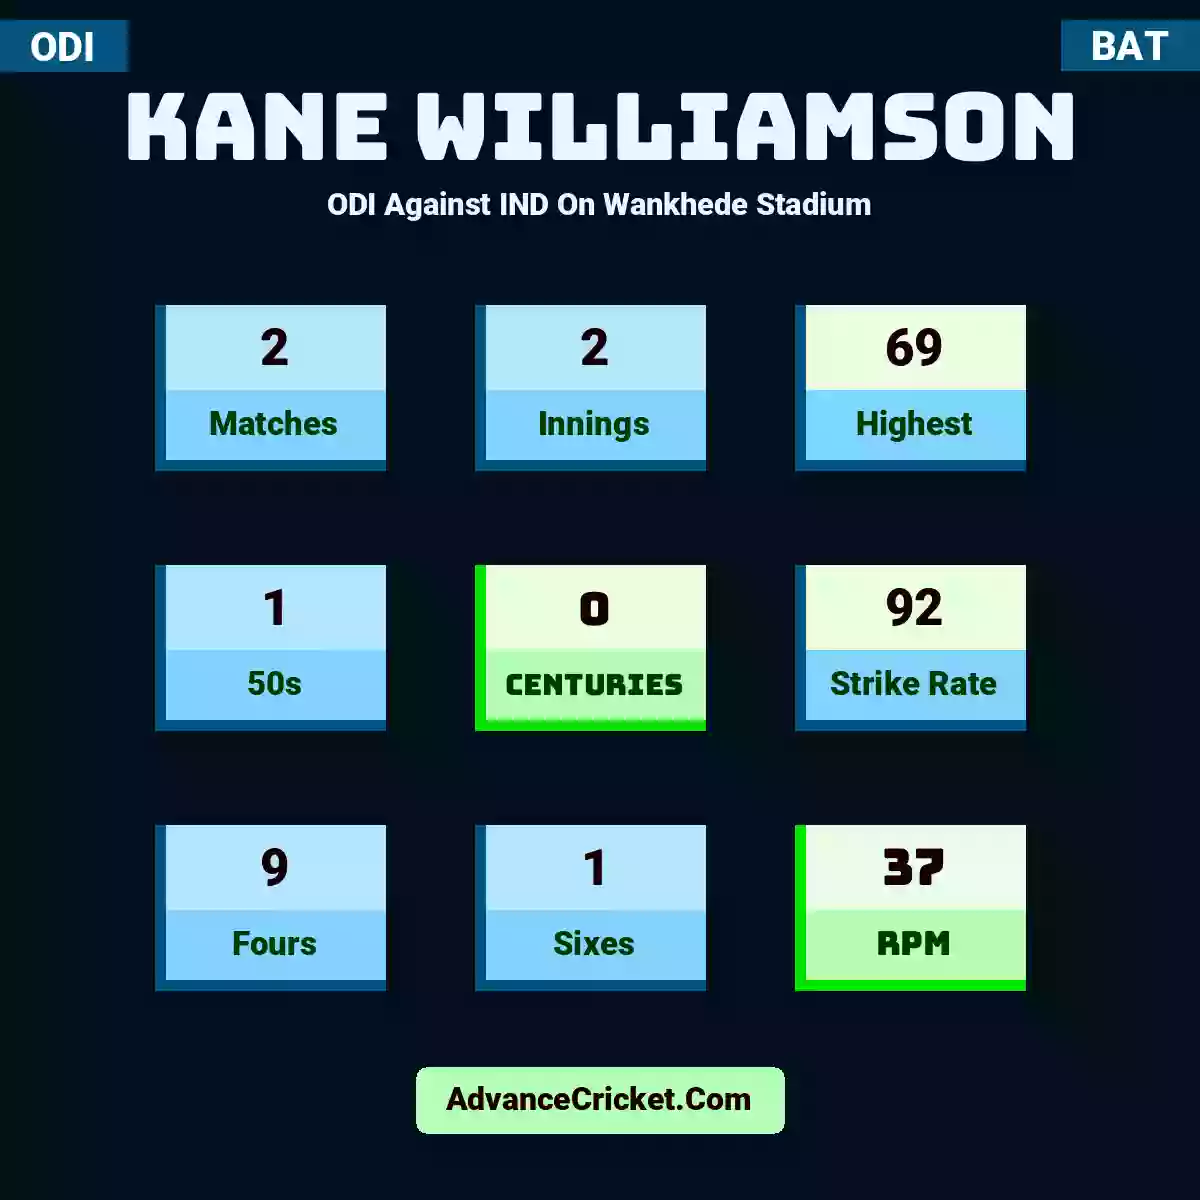 Kane Williamson ODI  Against IND On Wankhede Stadium, Kane Williamson played 2 matches, scored 69 runs as highest, 1 half-centuries, and 0 centuries, with a strike rate of 92. K.Williamson hit 9 fours and 1 sixes, with an RPM of 37.